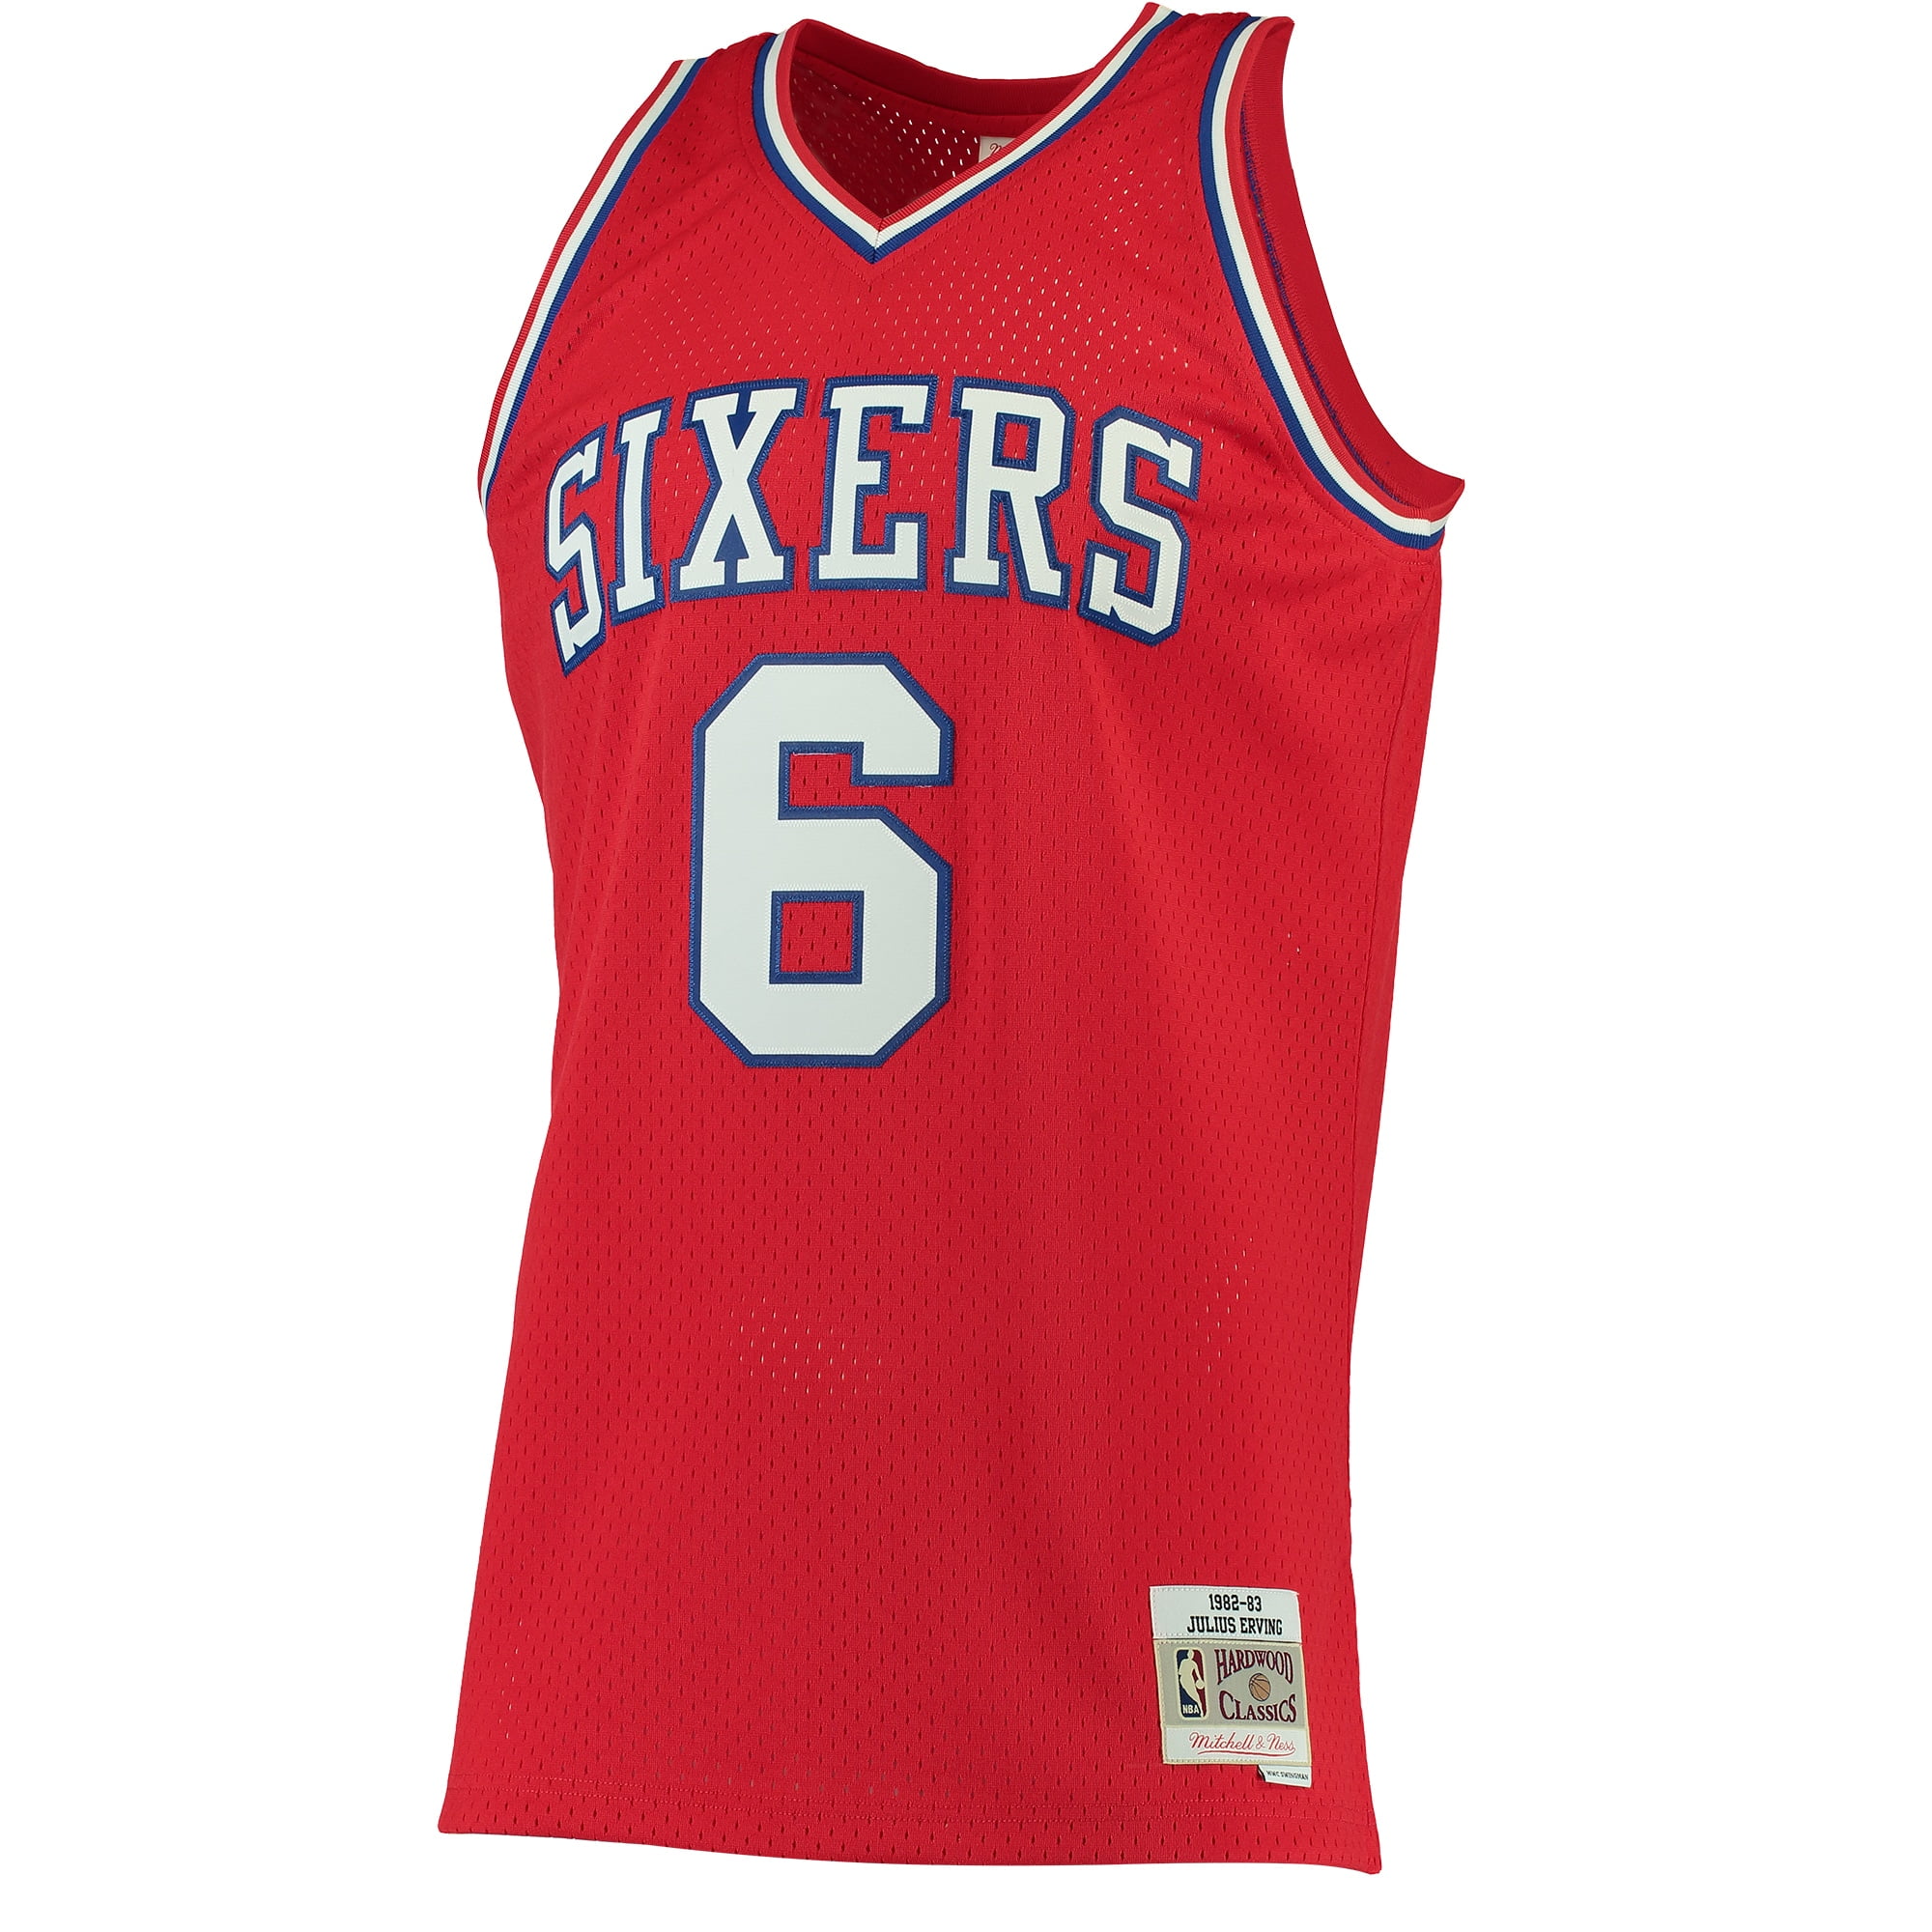 Julius Erving Autographed & Inscribed 1980 NBA All-Star Game Authentic  Mitchell & Ness Jersey